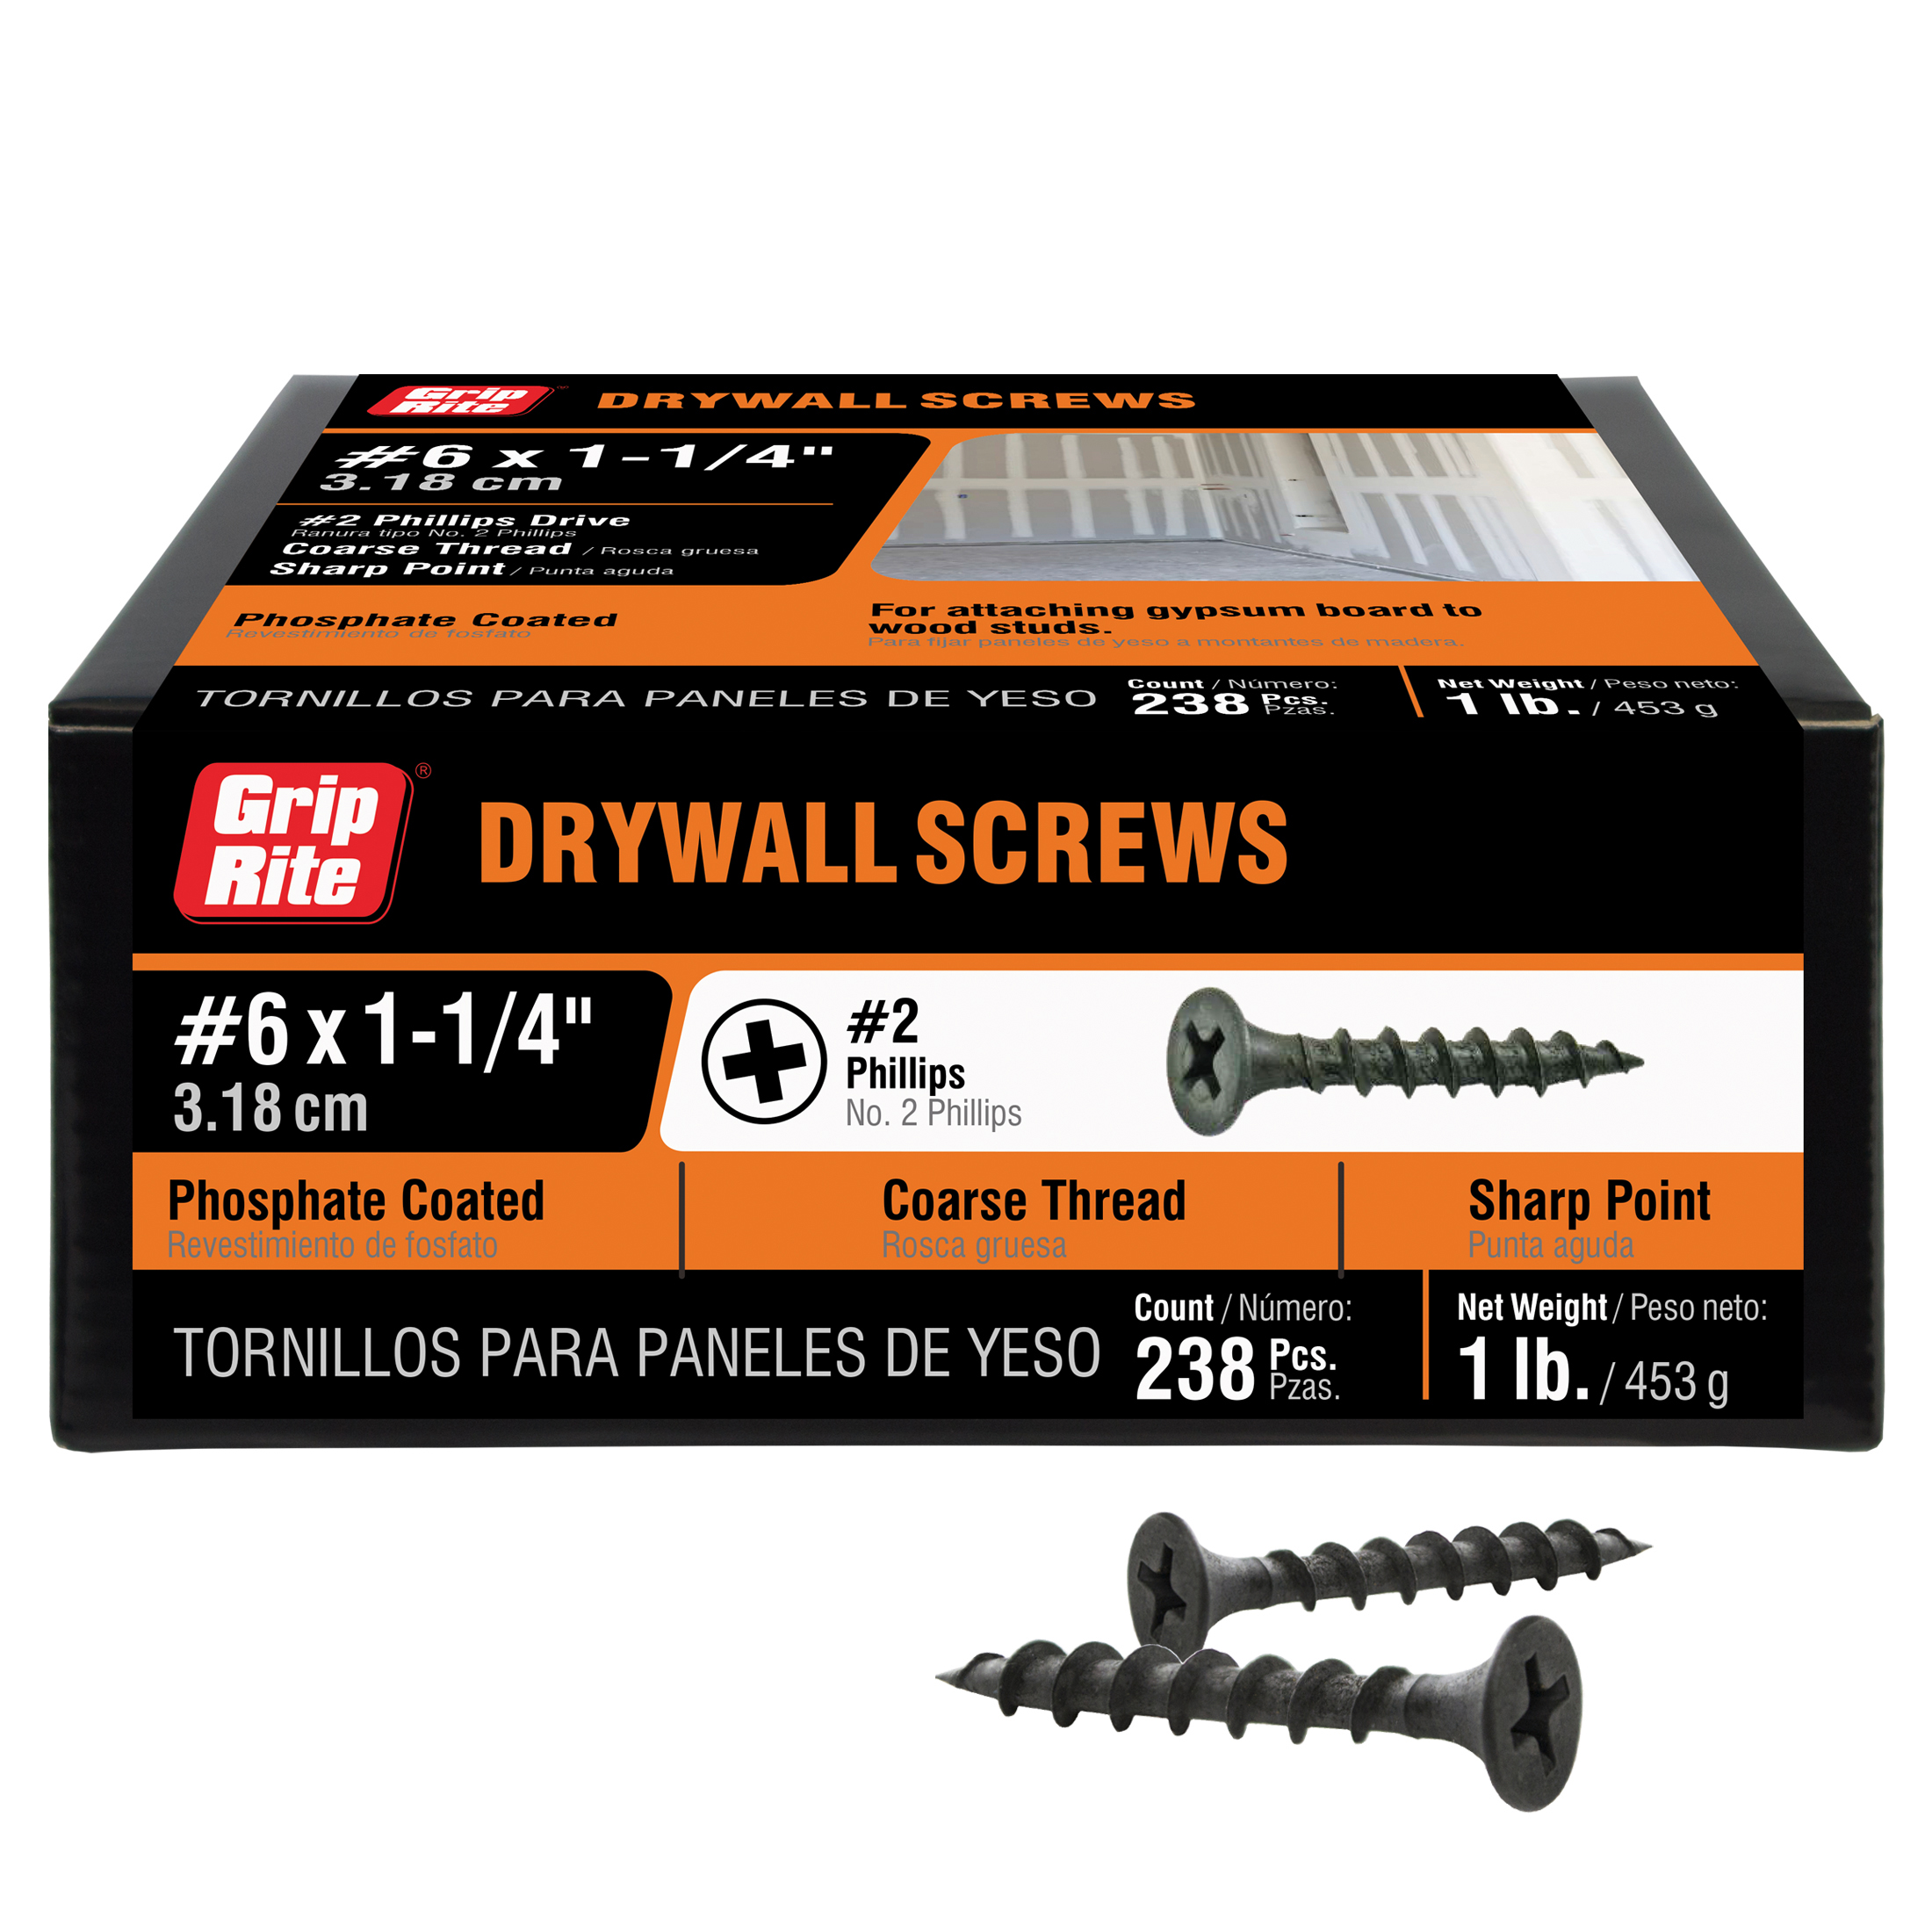 Grip-Rite #6 x 1-1/4 in. Phillips Bugle-Head Coarse Thread Sharp Point Drywall to Wood Screw 1lb. - image 5 of 8